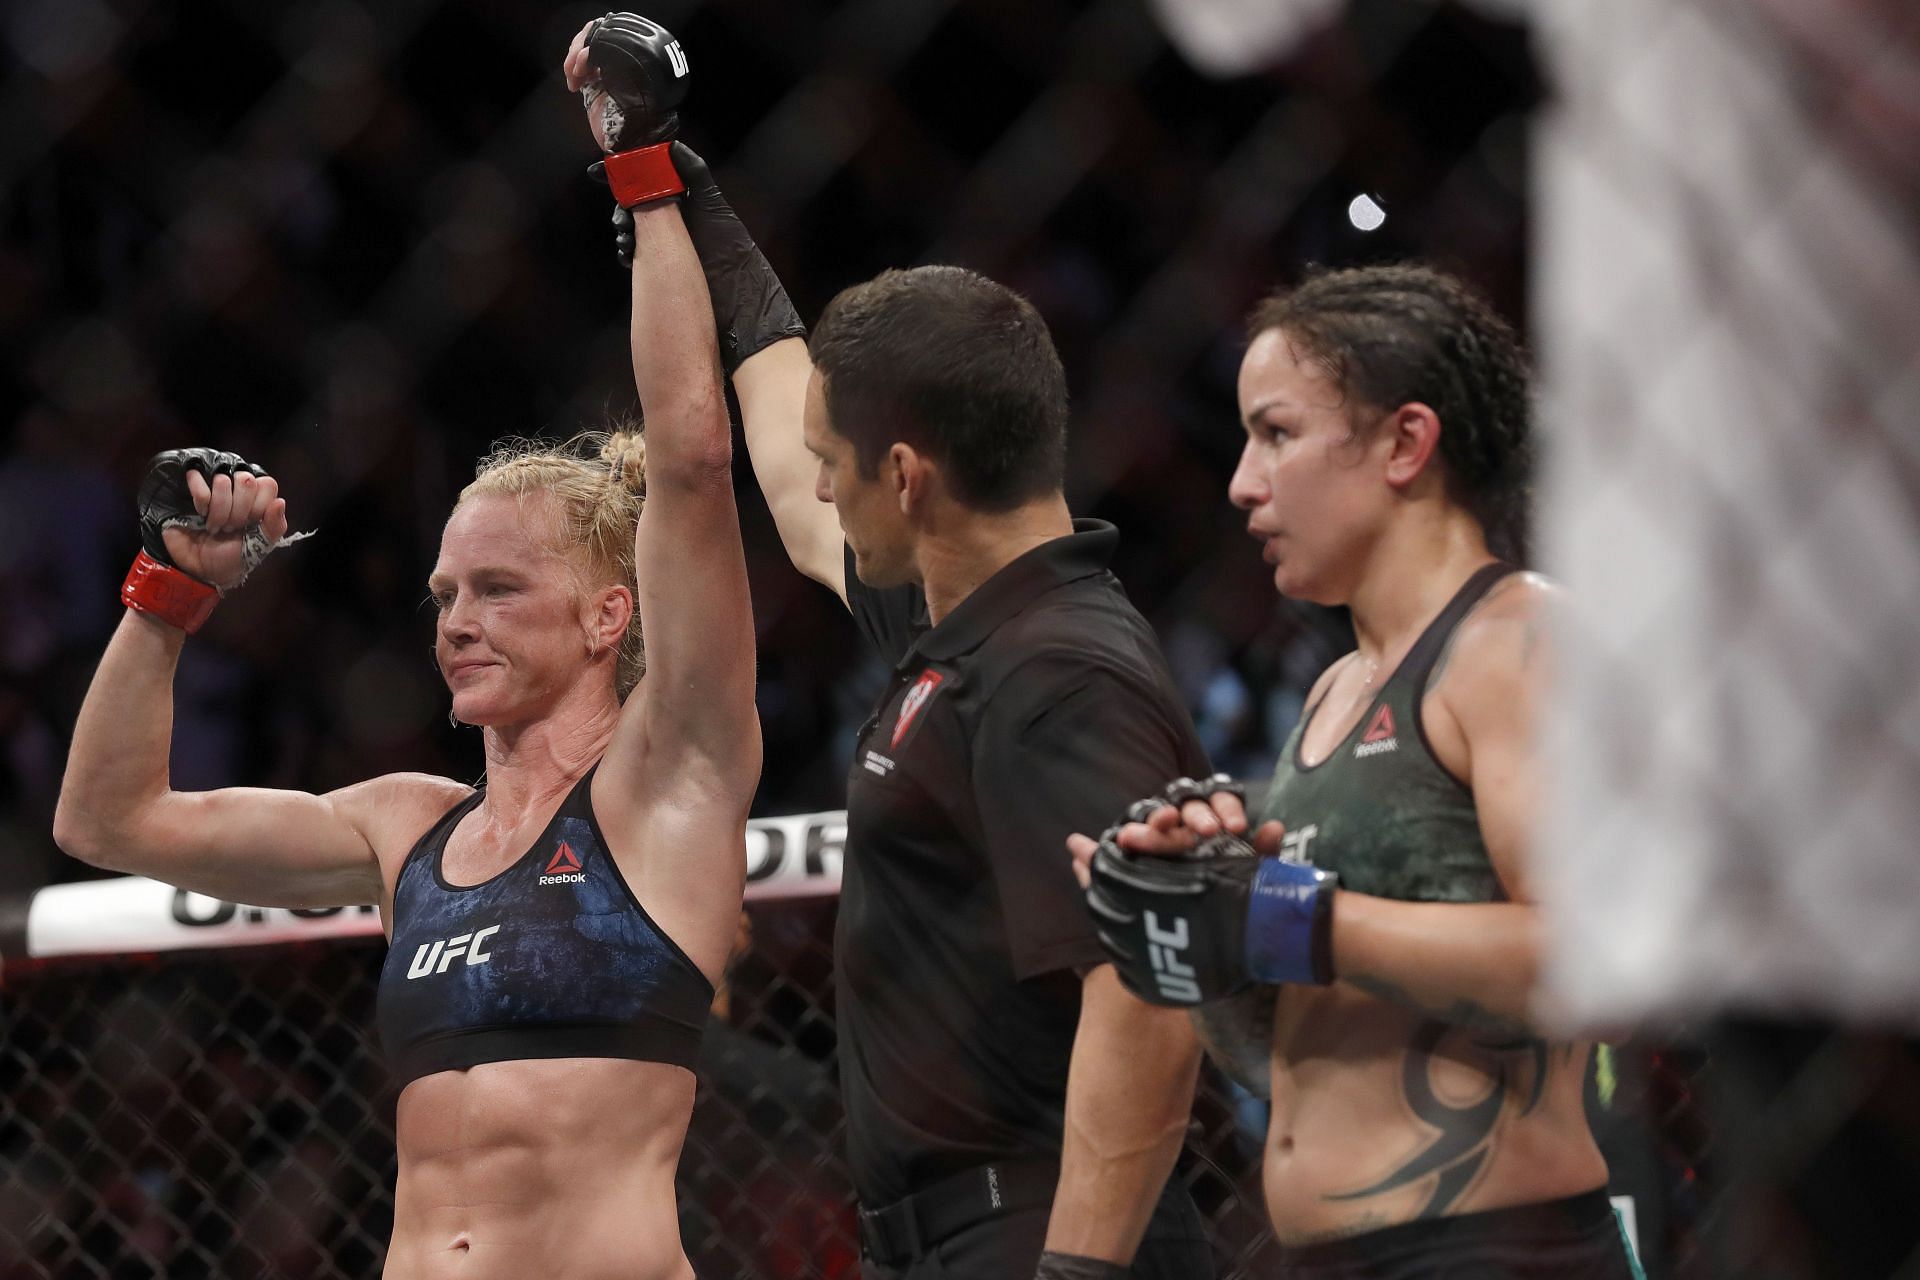 Holly Holm remains one of the more popular fighters in the UFC